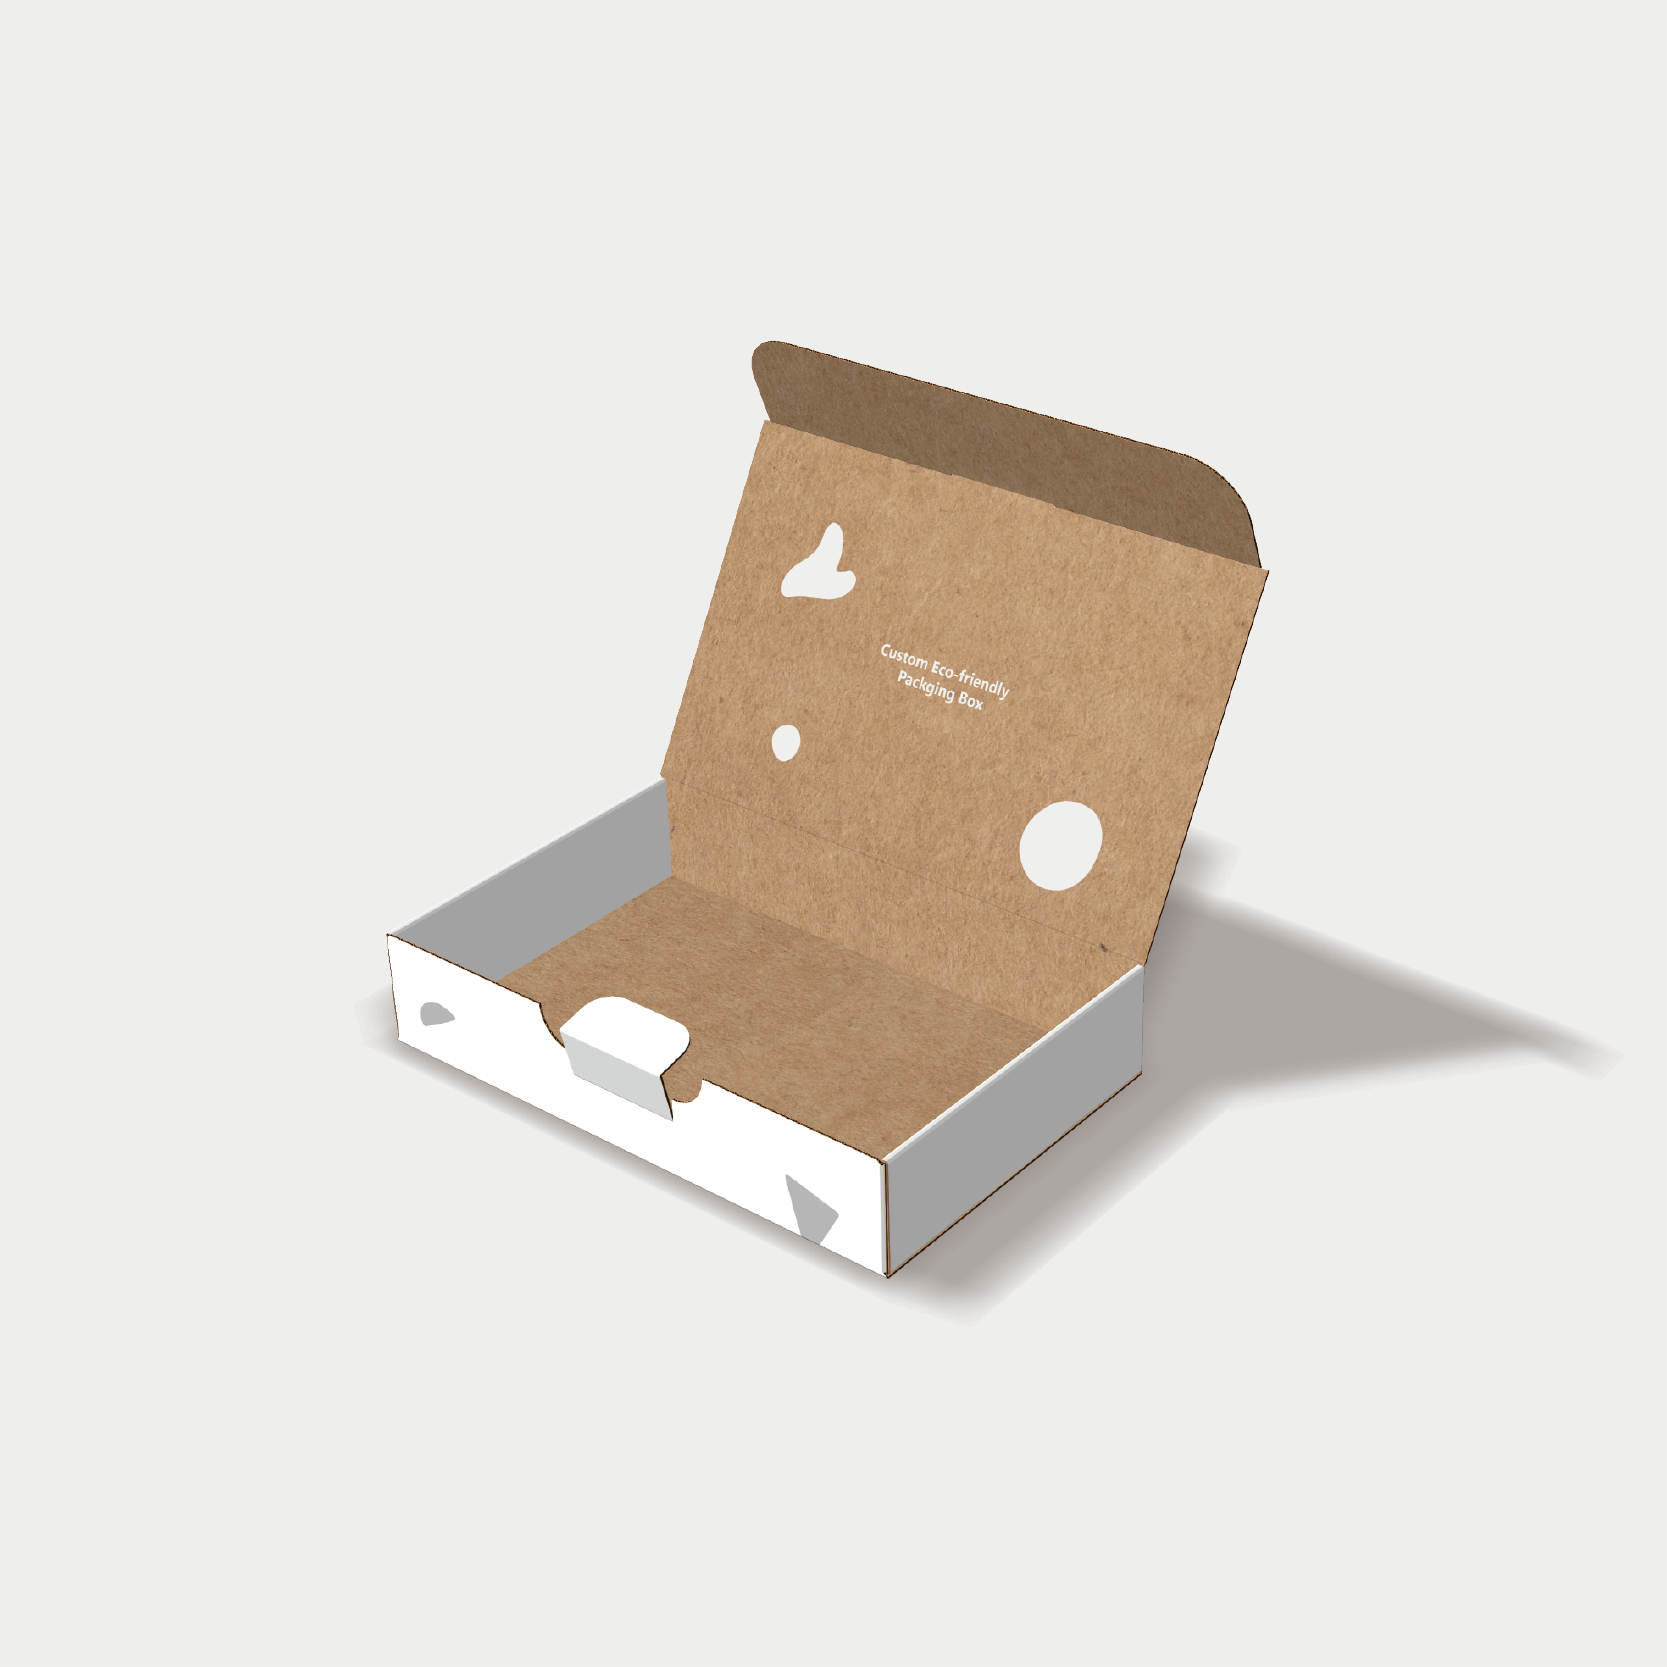 Mockup of a type of mailer box, with a lock